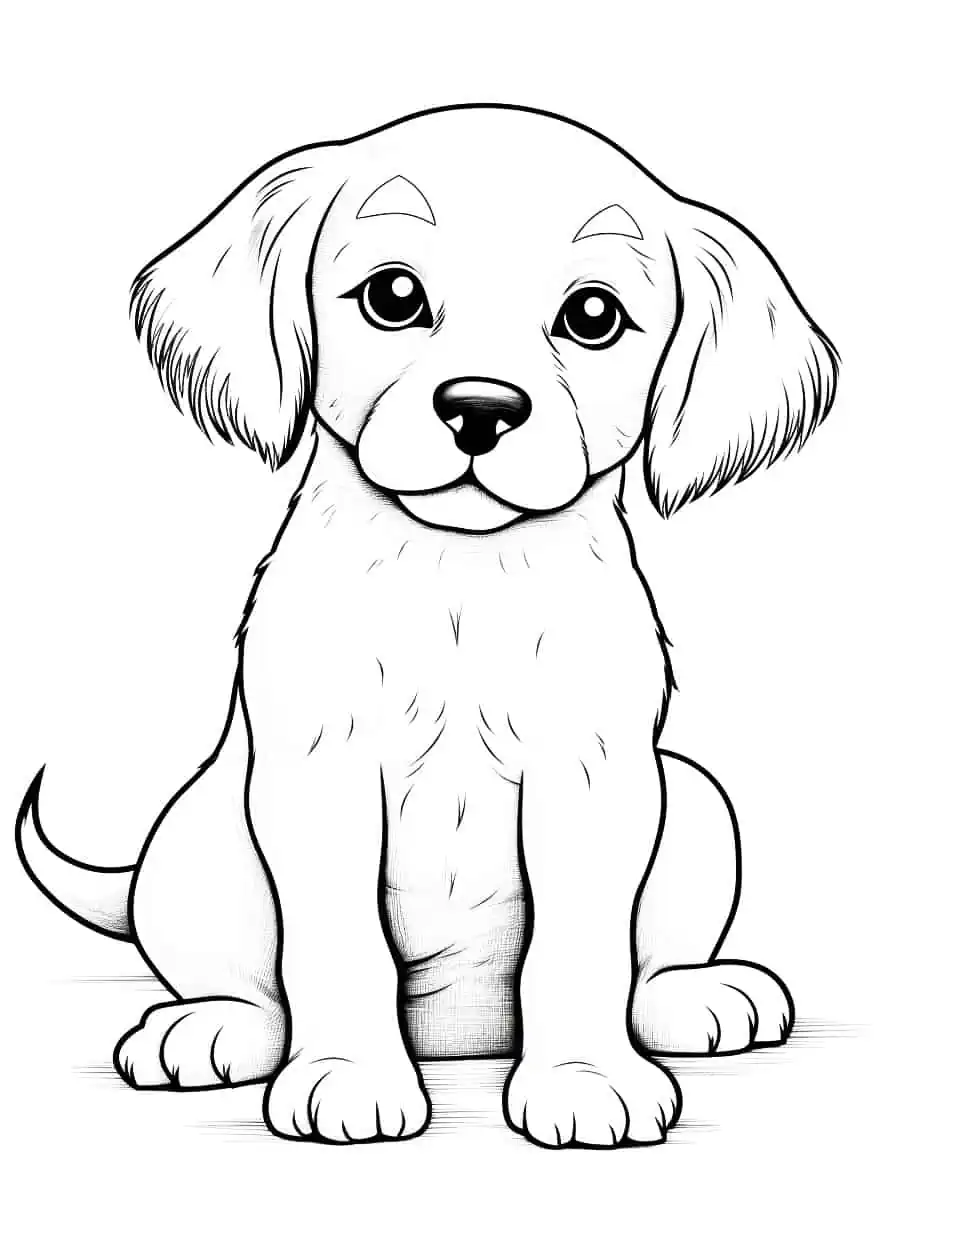 Easy Golden Retriever Outline Coloring Page - An easy-to-color outline of a Golden Retriever puppy.